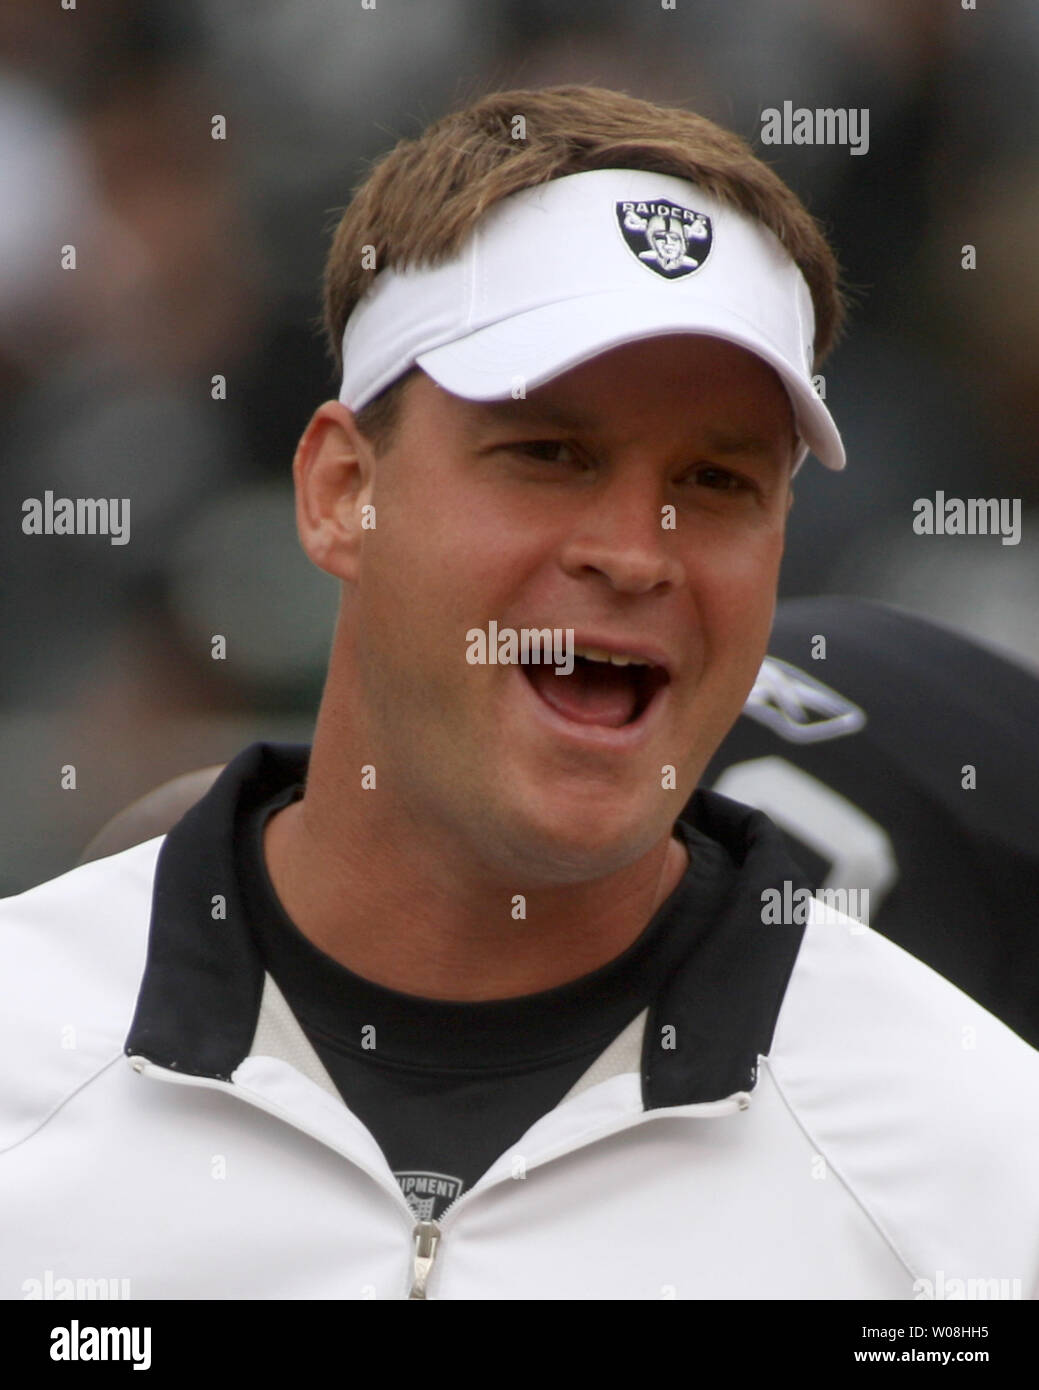 Oakland Raiders Head Coach Lane Kiffin shouts directions during warmups before play against the Detroit Lions at McAfee Coliseum in Oakland, California on September 9, 2007. The Lions defeated the Raiders 36-21.   (UPI Photo/Terry Schmitt) Stock Photo